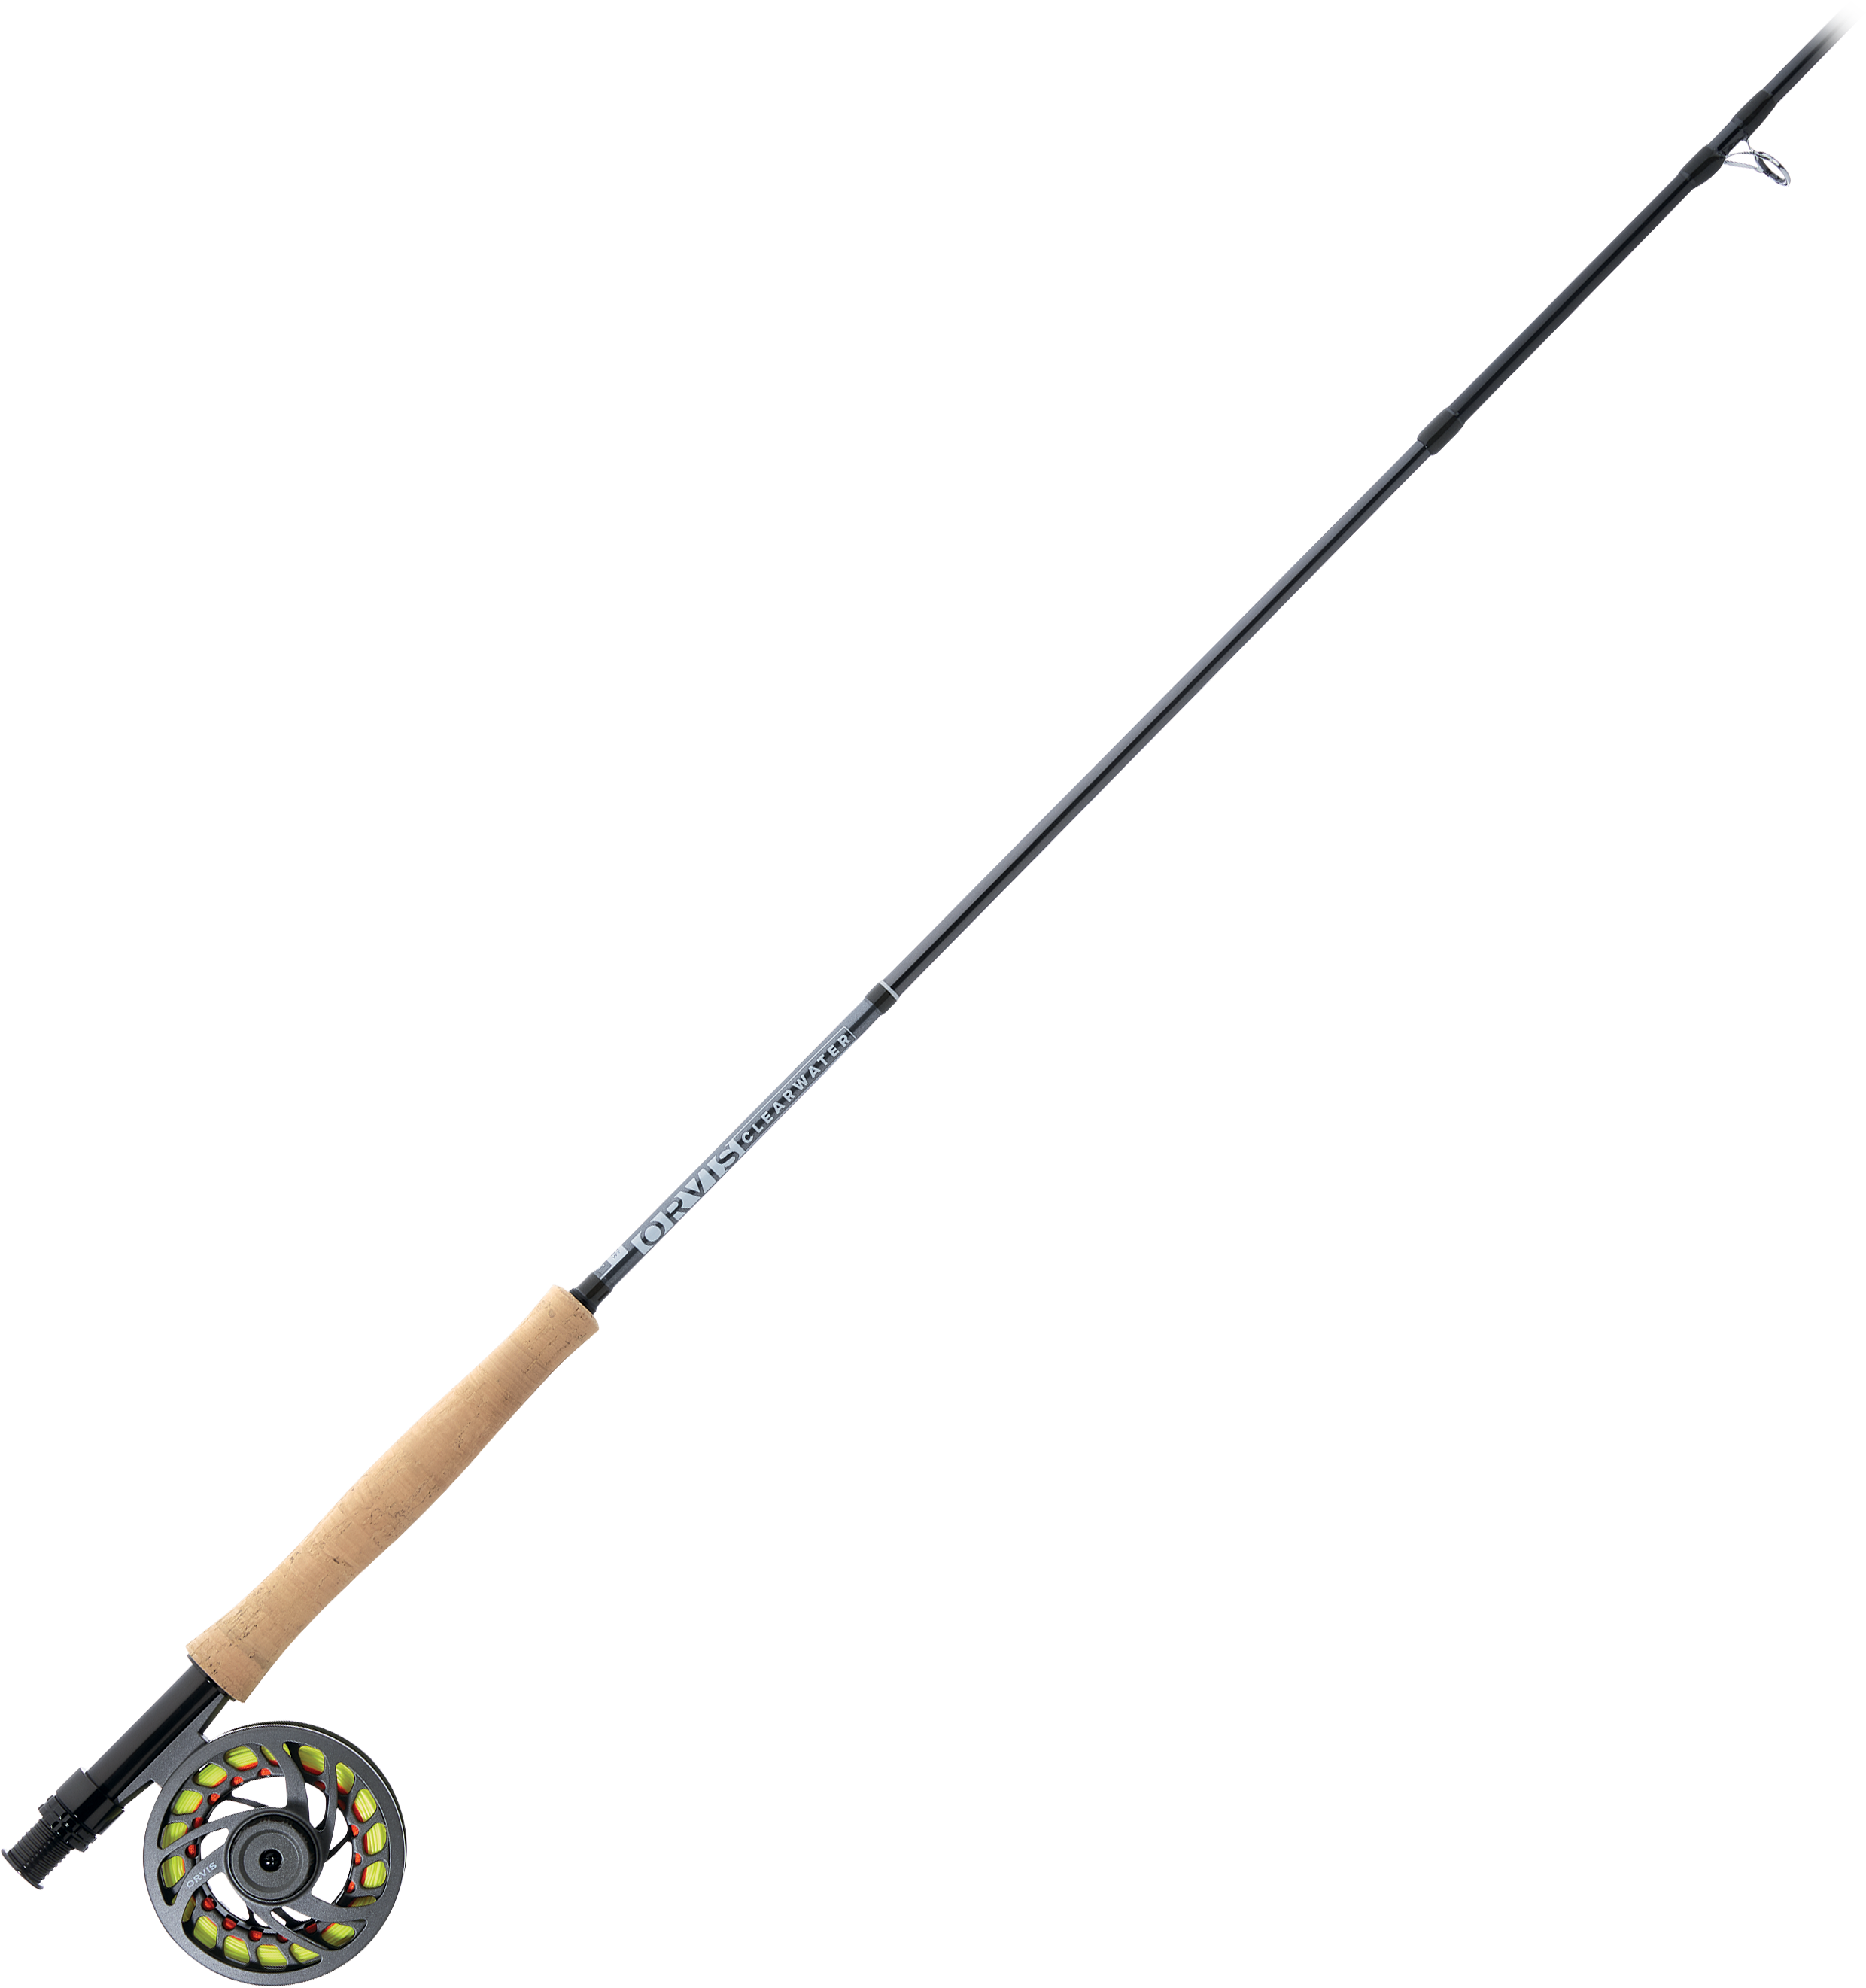 Buy Orvis Clearwater II Fly Fishing Combo 9ft 5wt 4pc WF5F online at